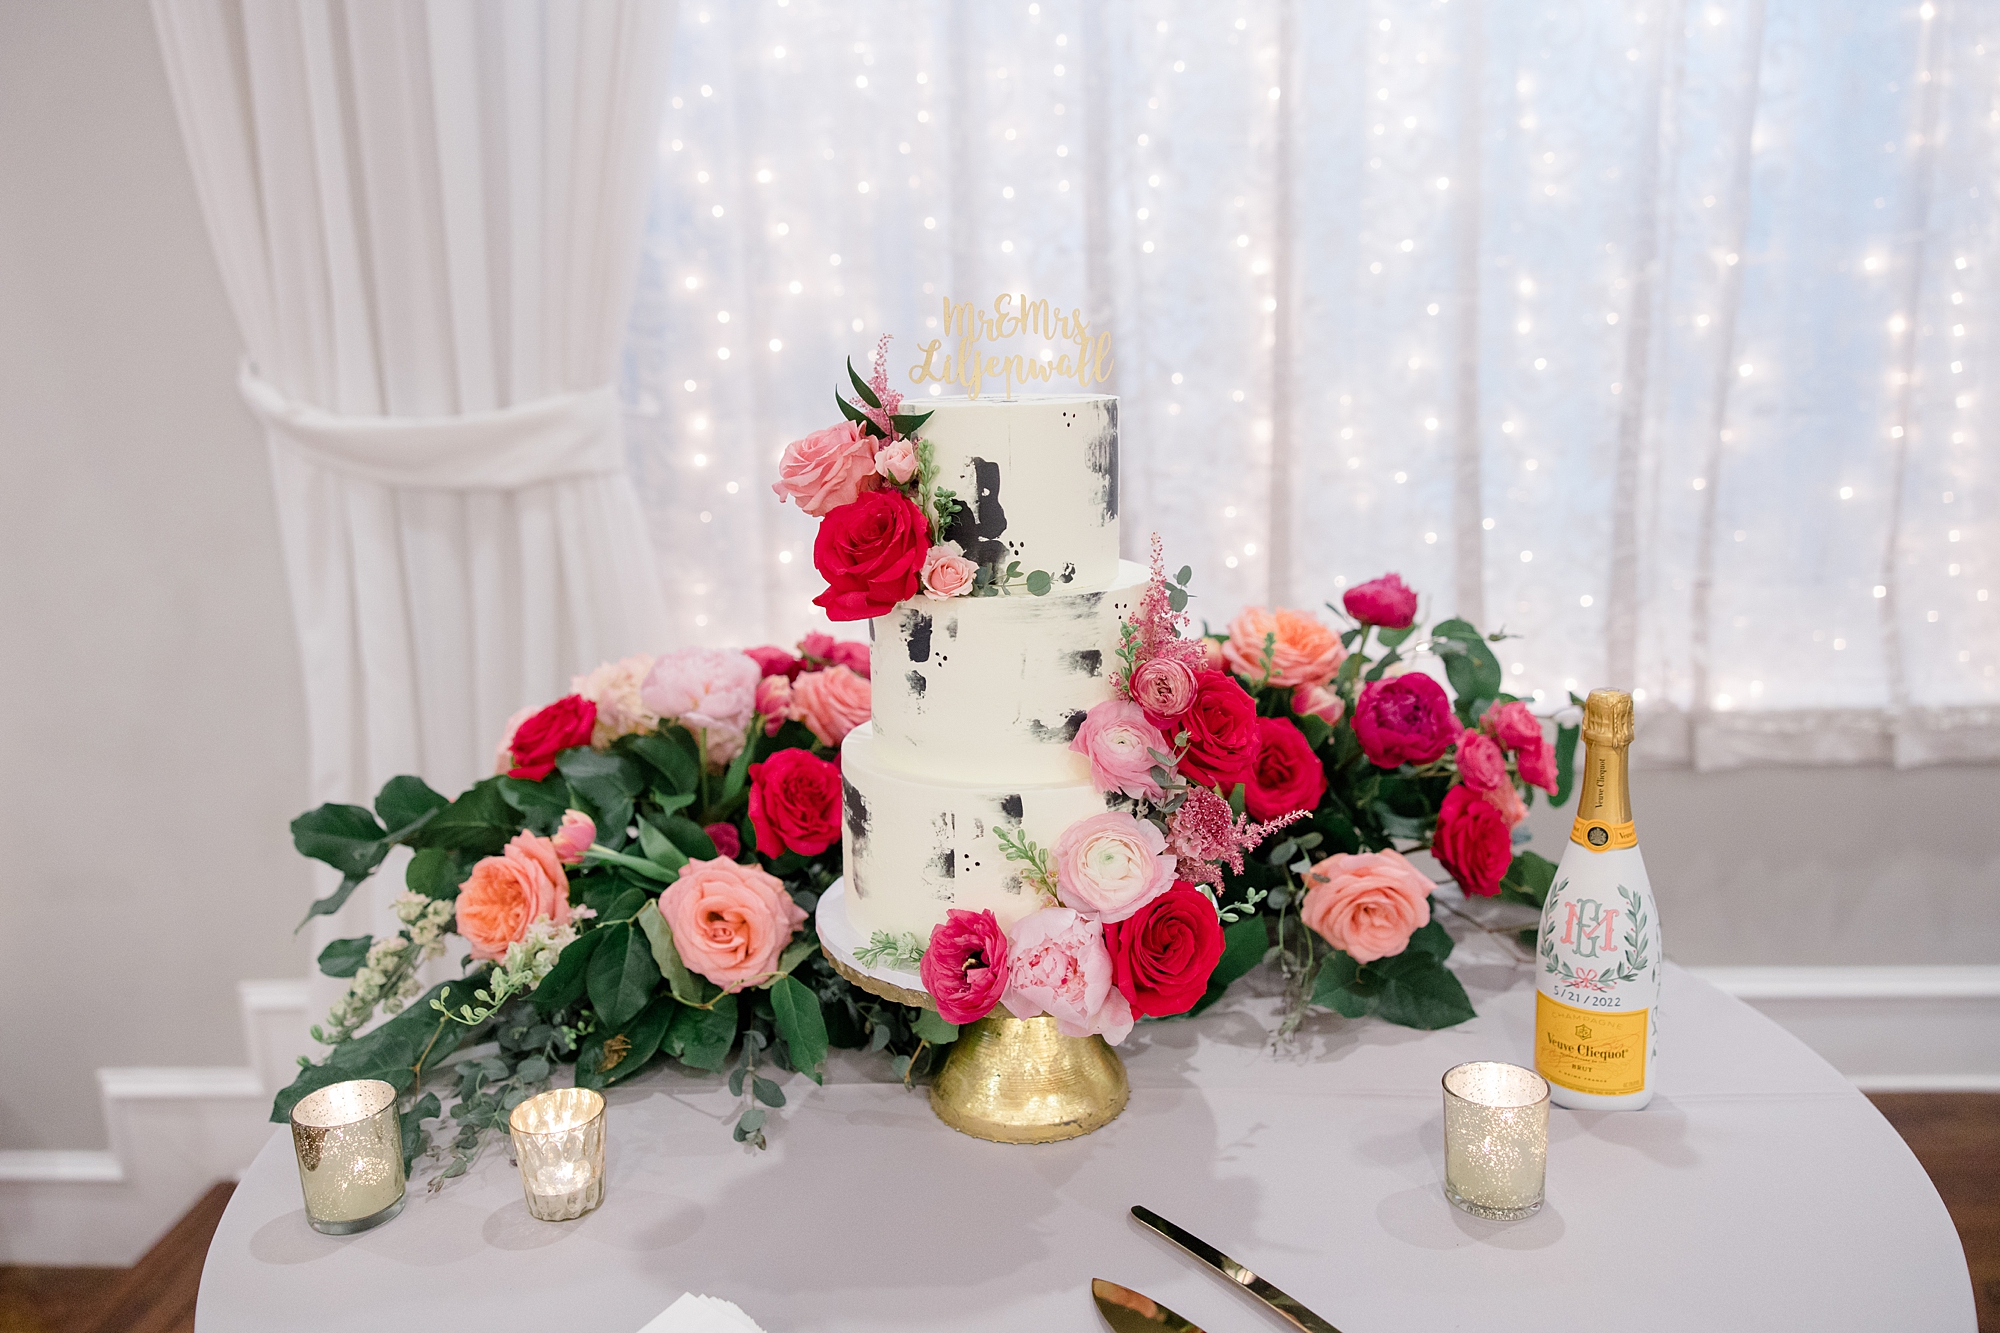 cake display with pink flowers and gold votive candles